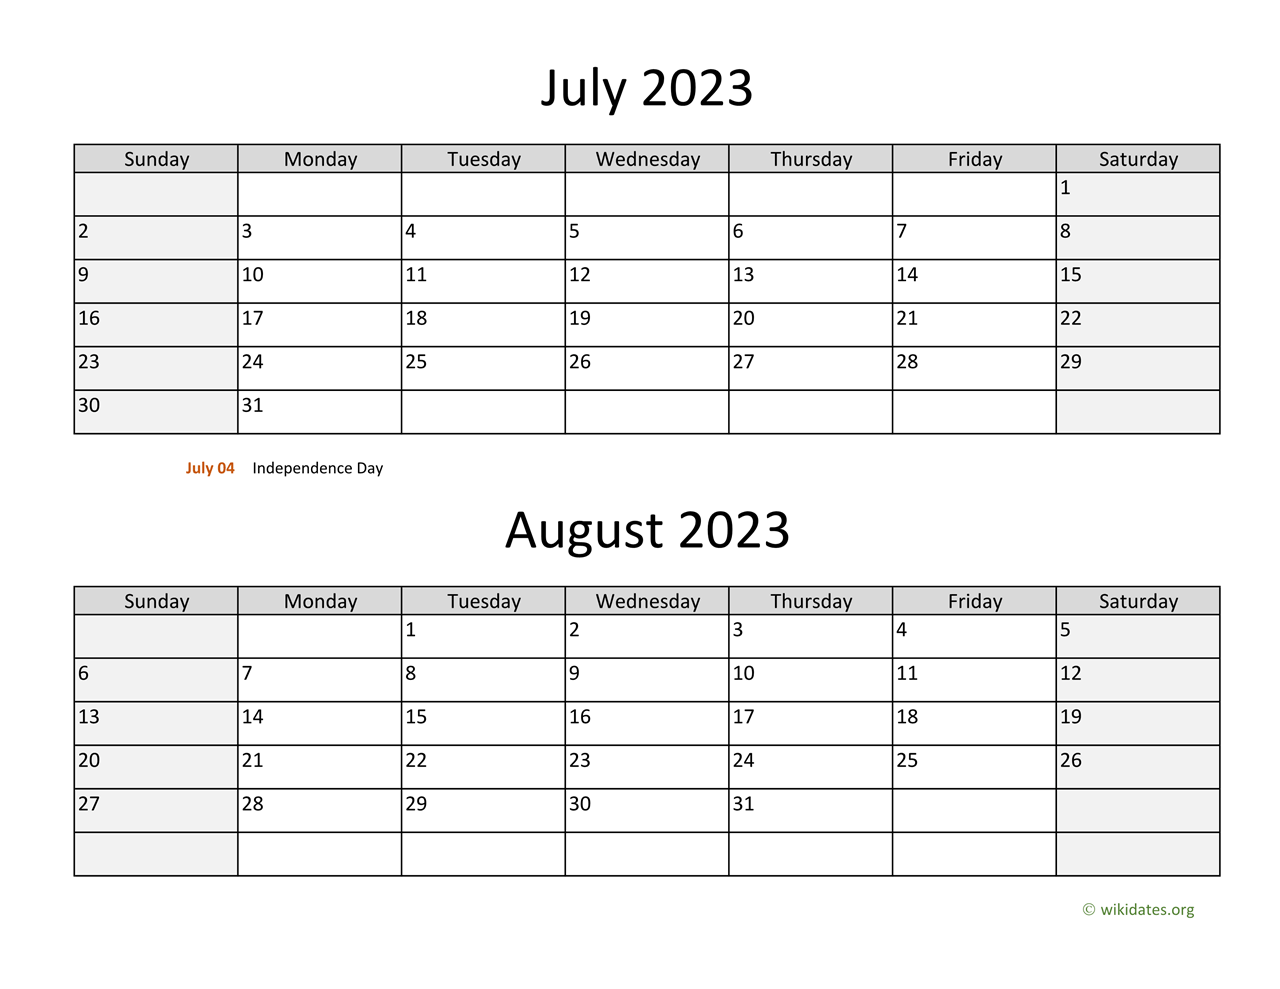 July and August 2023 Calendar